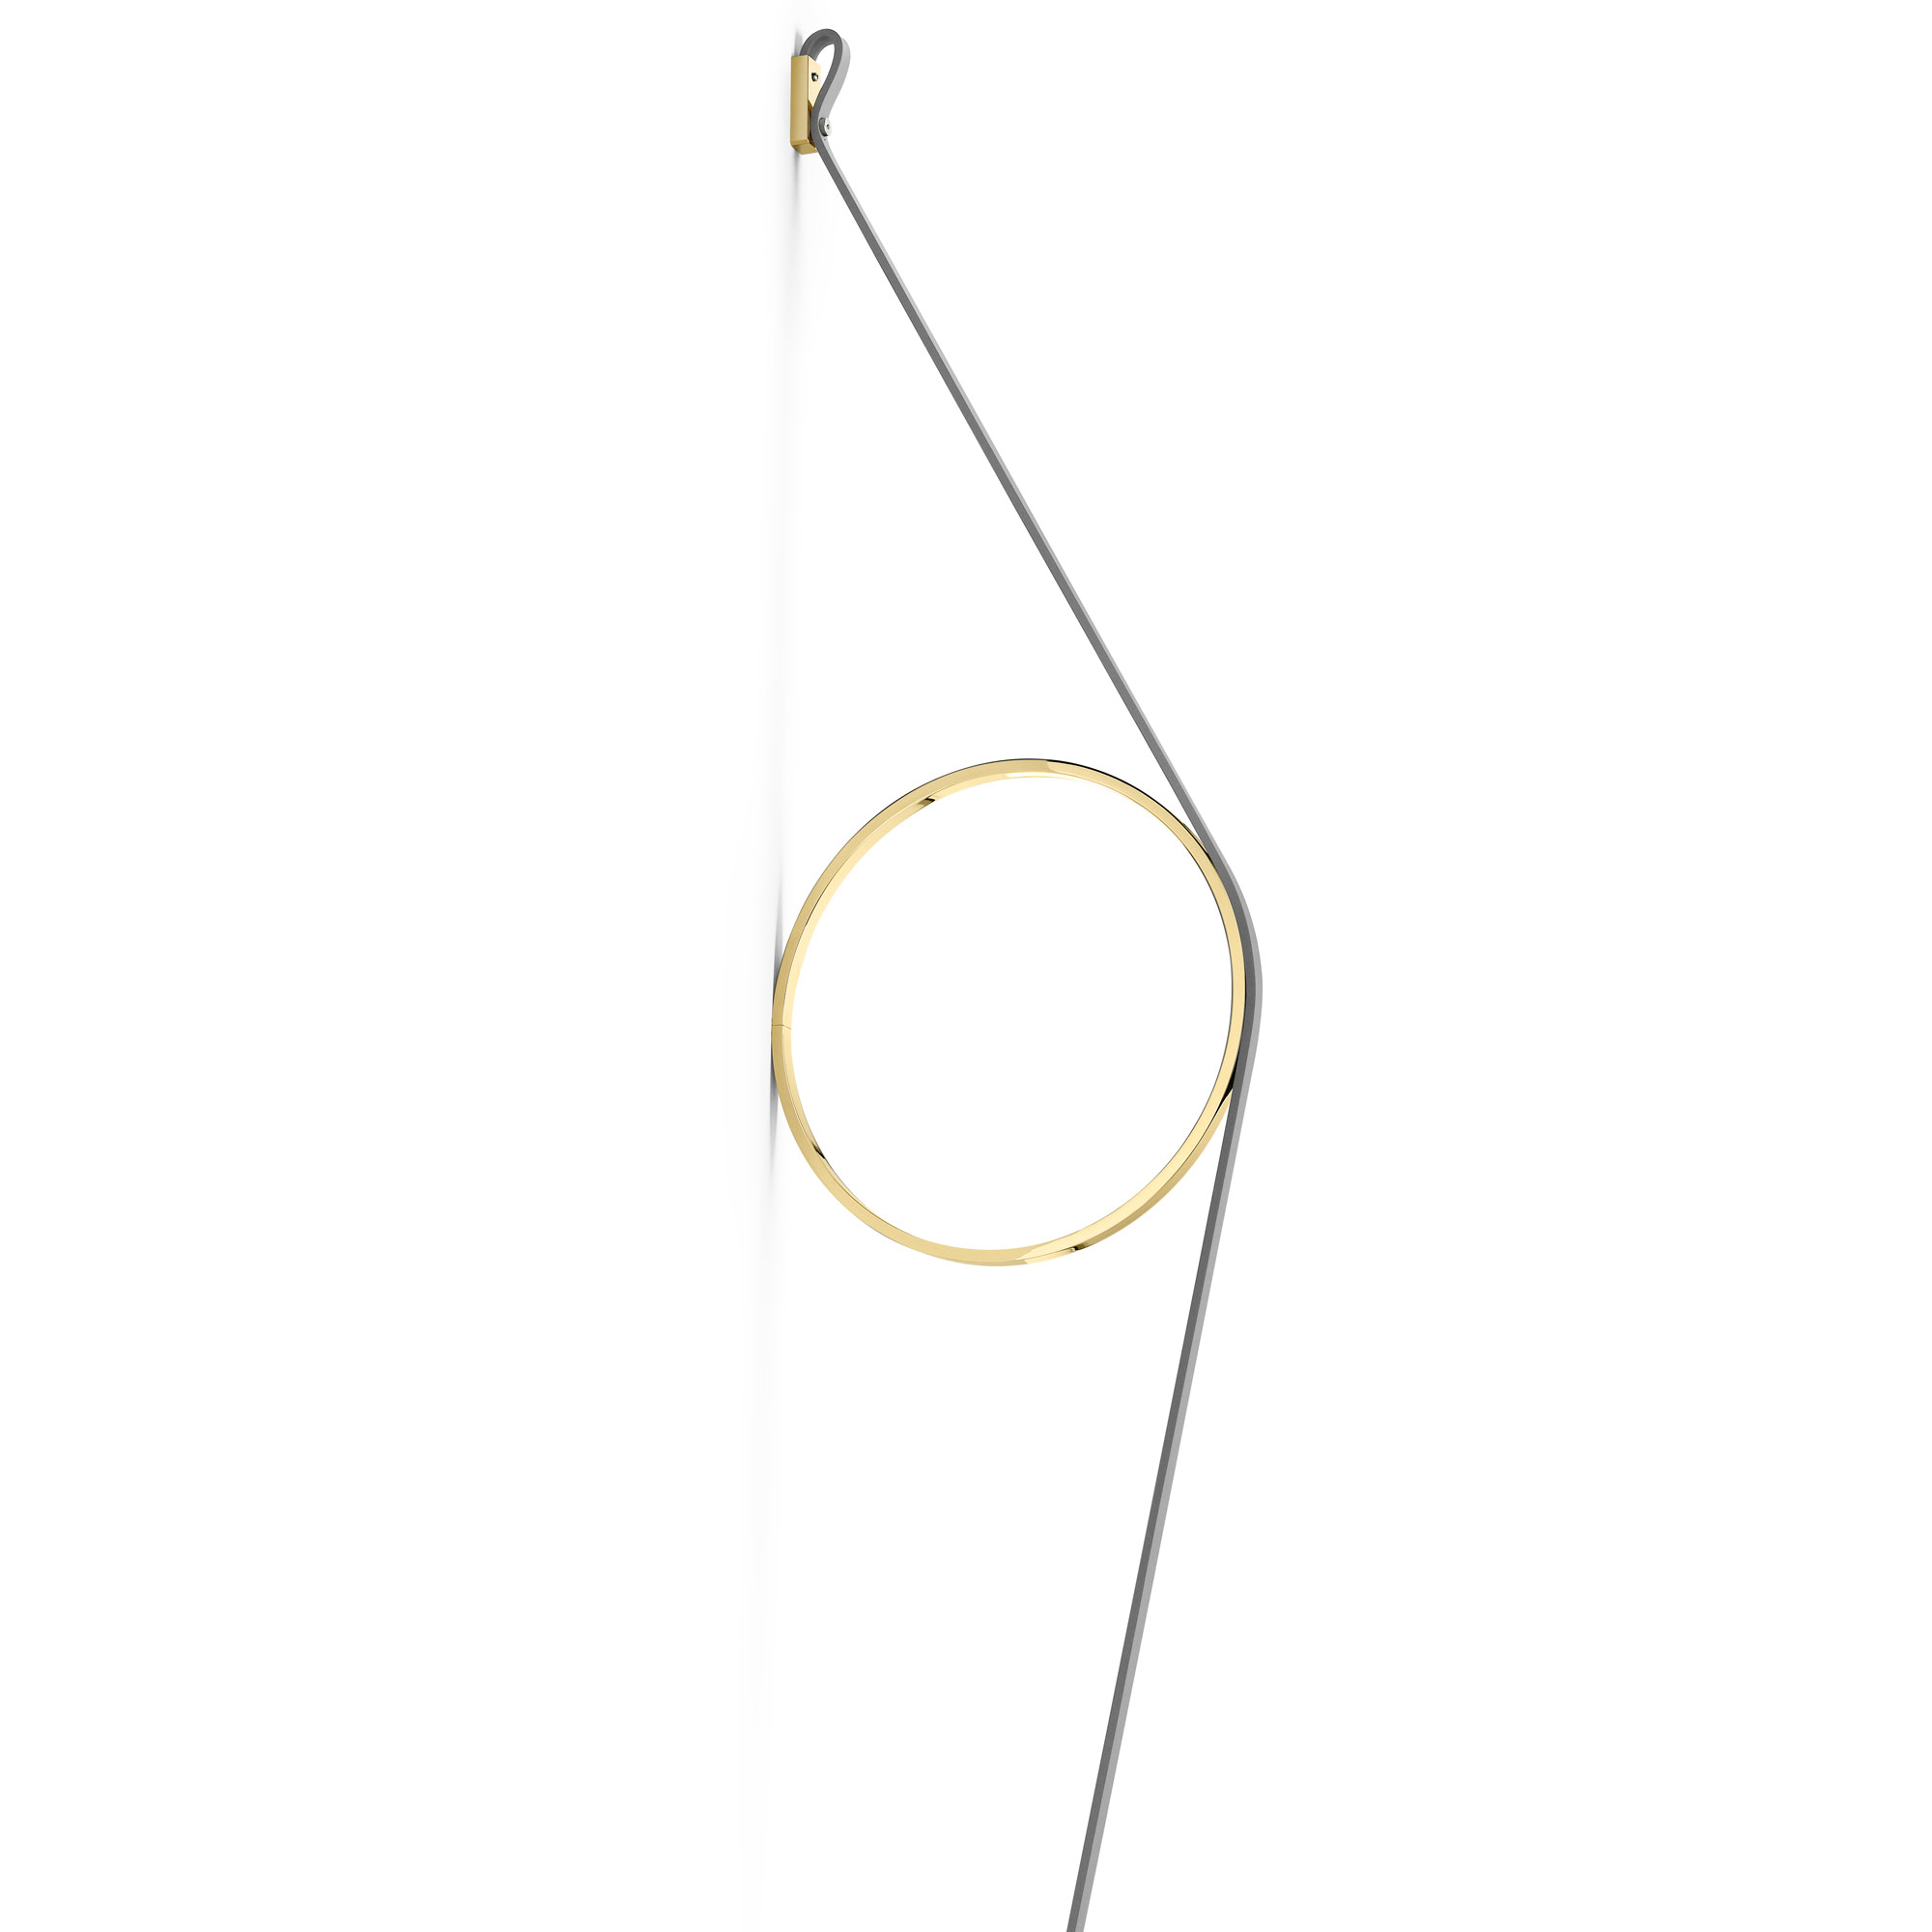 Wirering Wall Light by Flos | F9513044 FLO770799